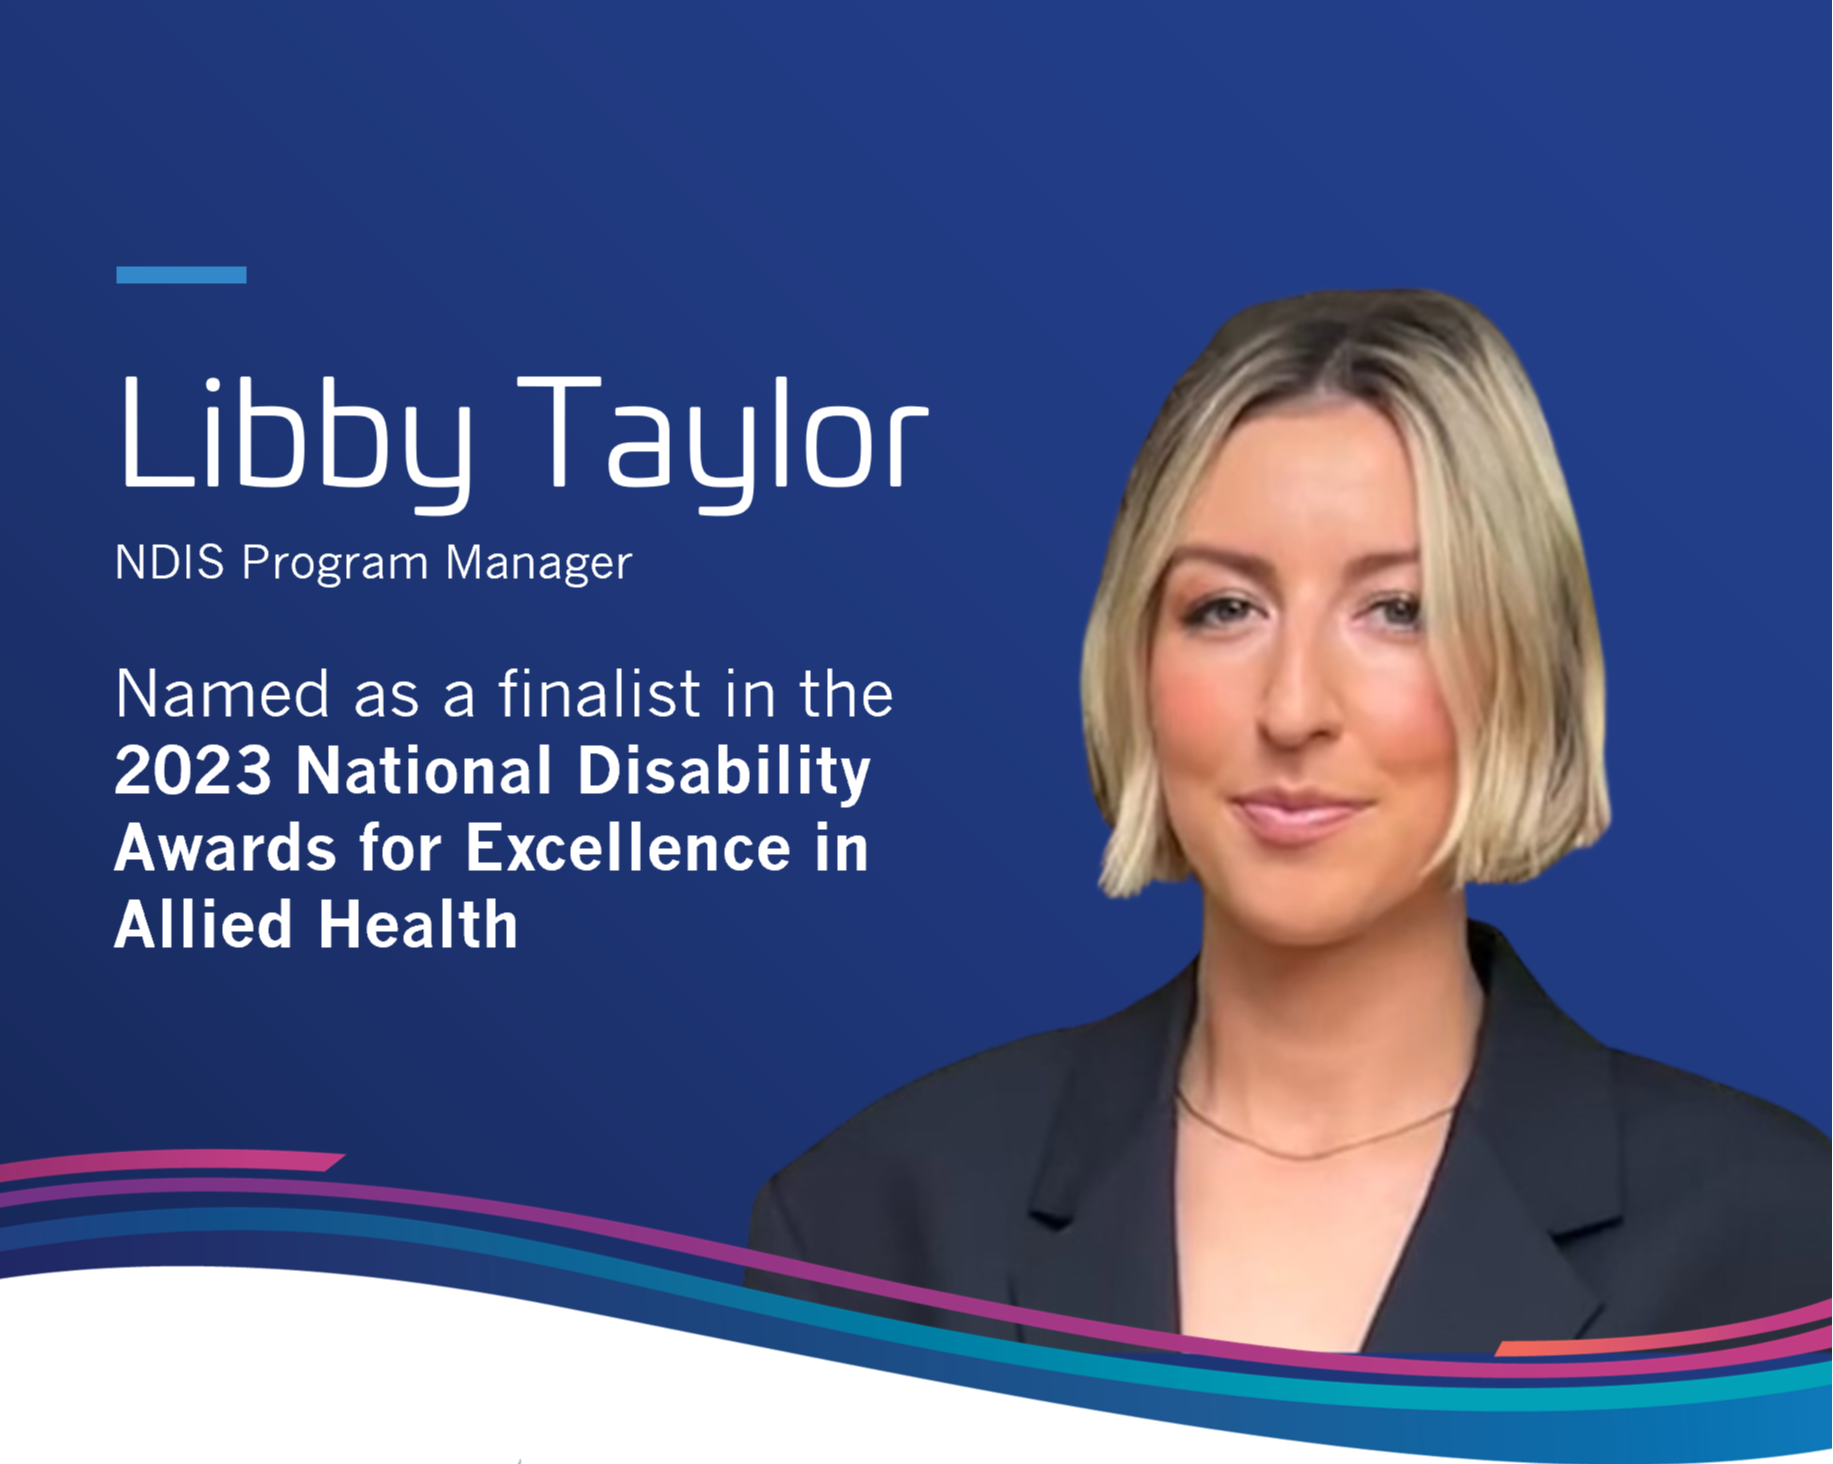 Libby Taylor's Finalist Nomination for Excellence in Allied Health